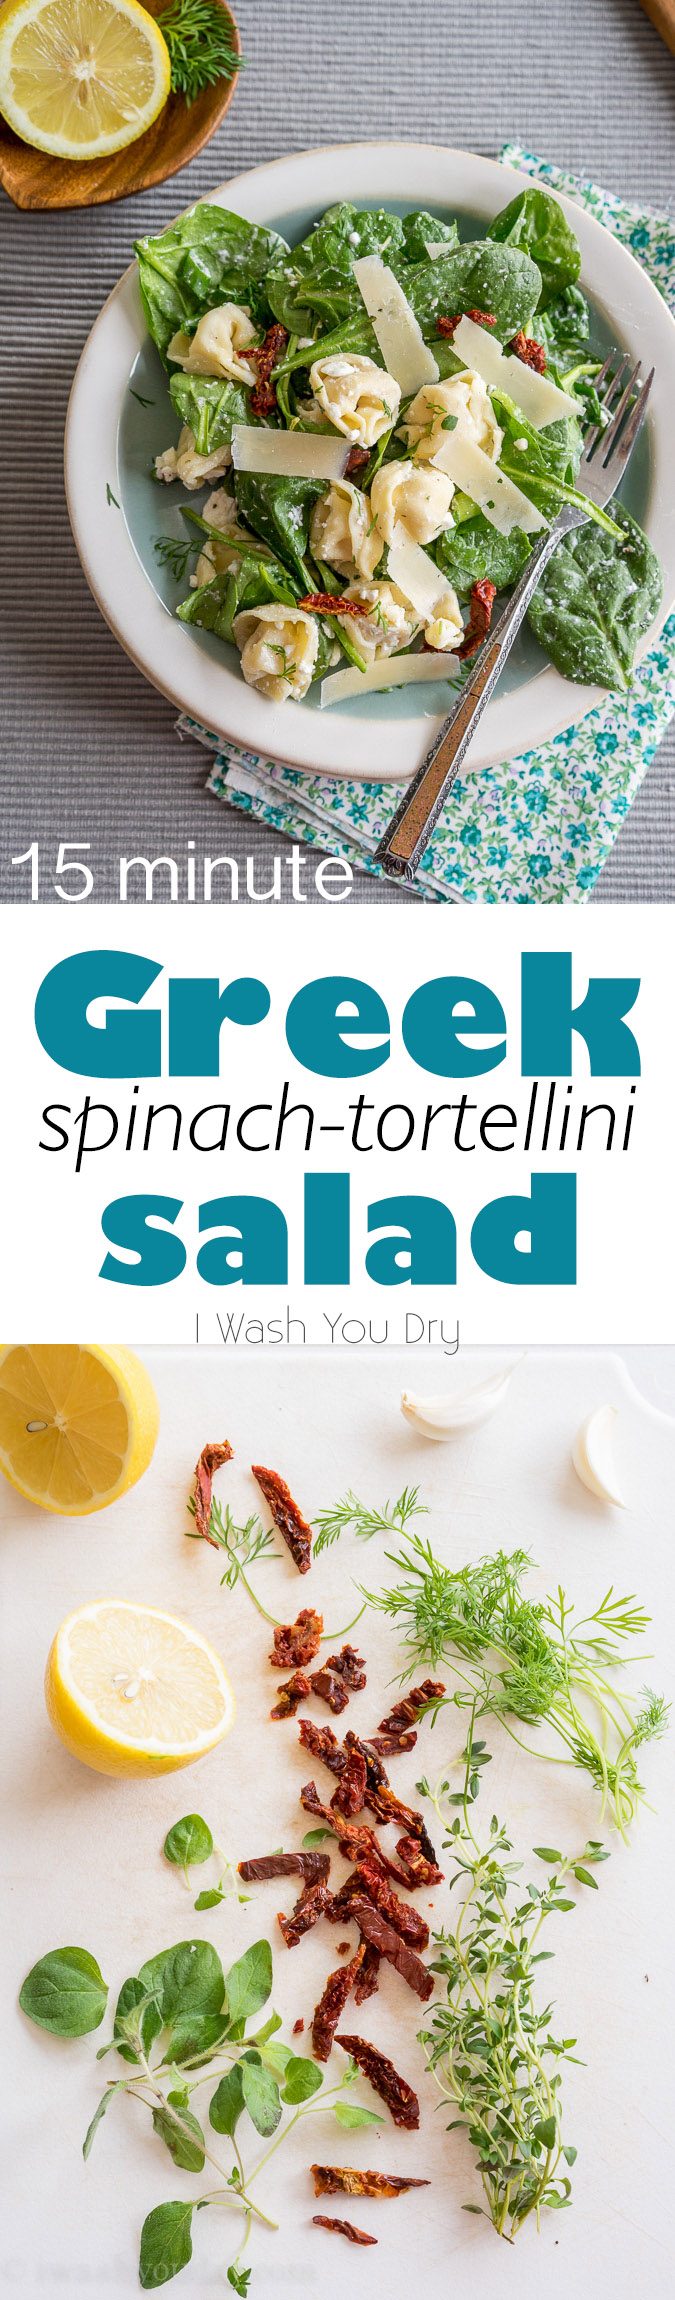 Love this quick and easy Greek Spinach-Tortellini Salad. The flavors are all great together!